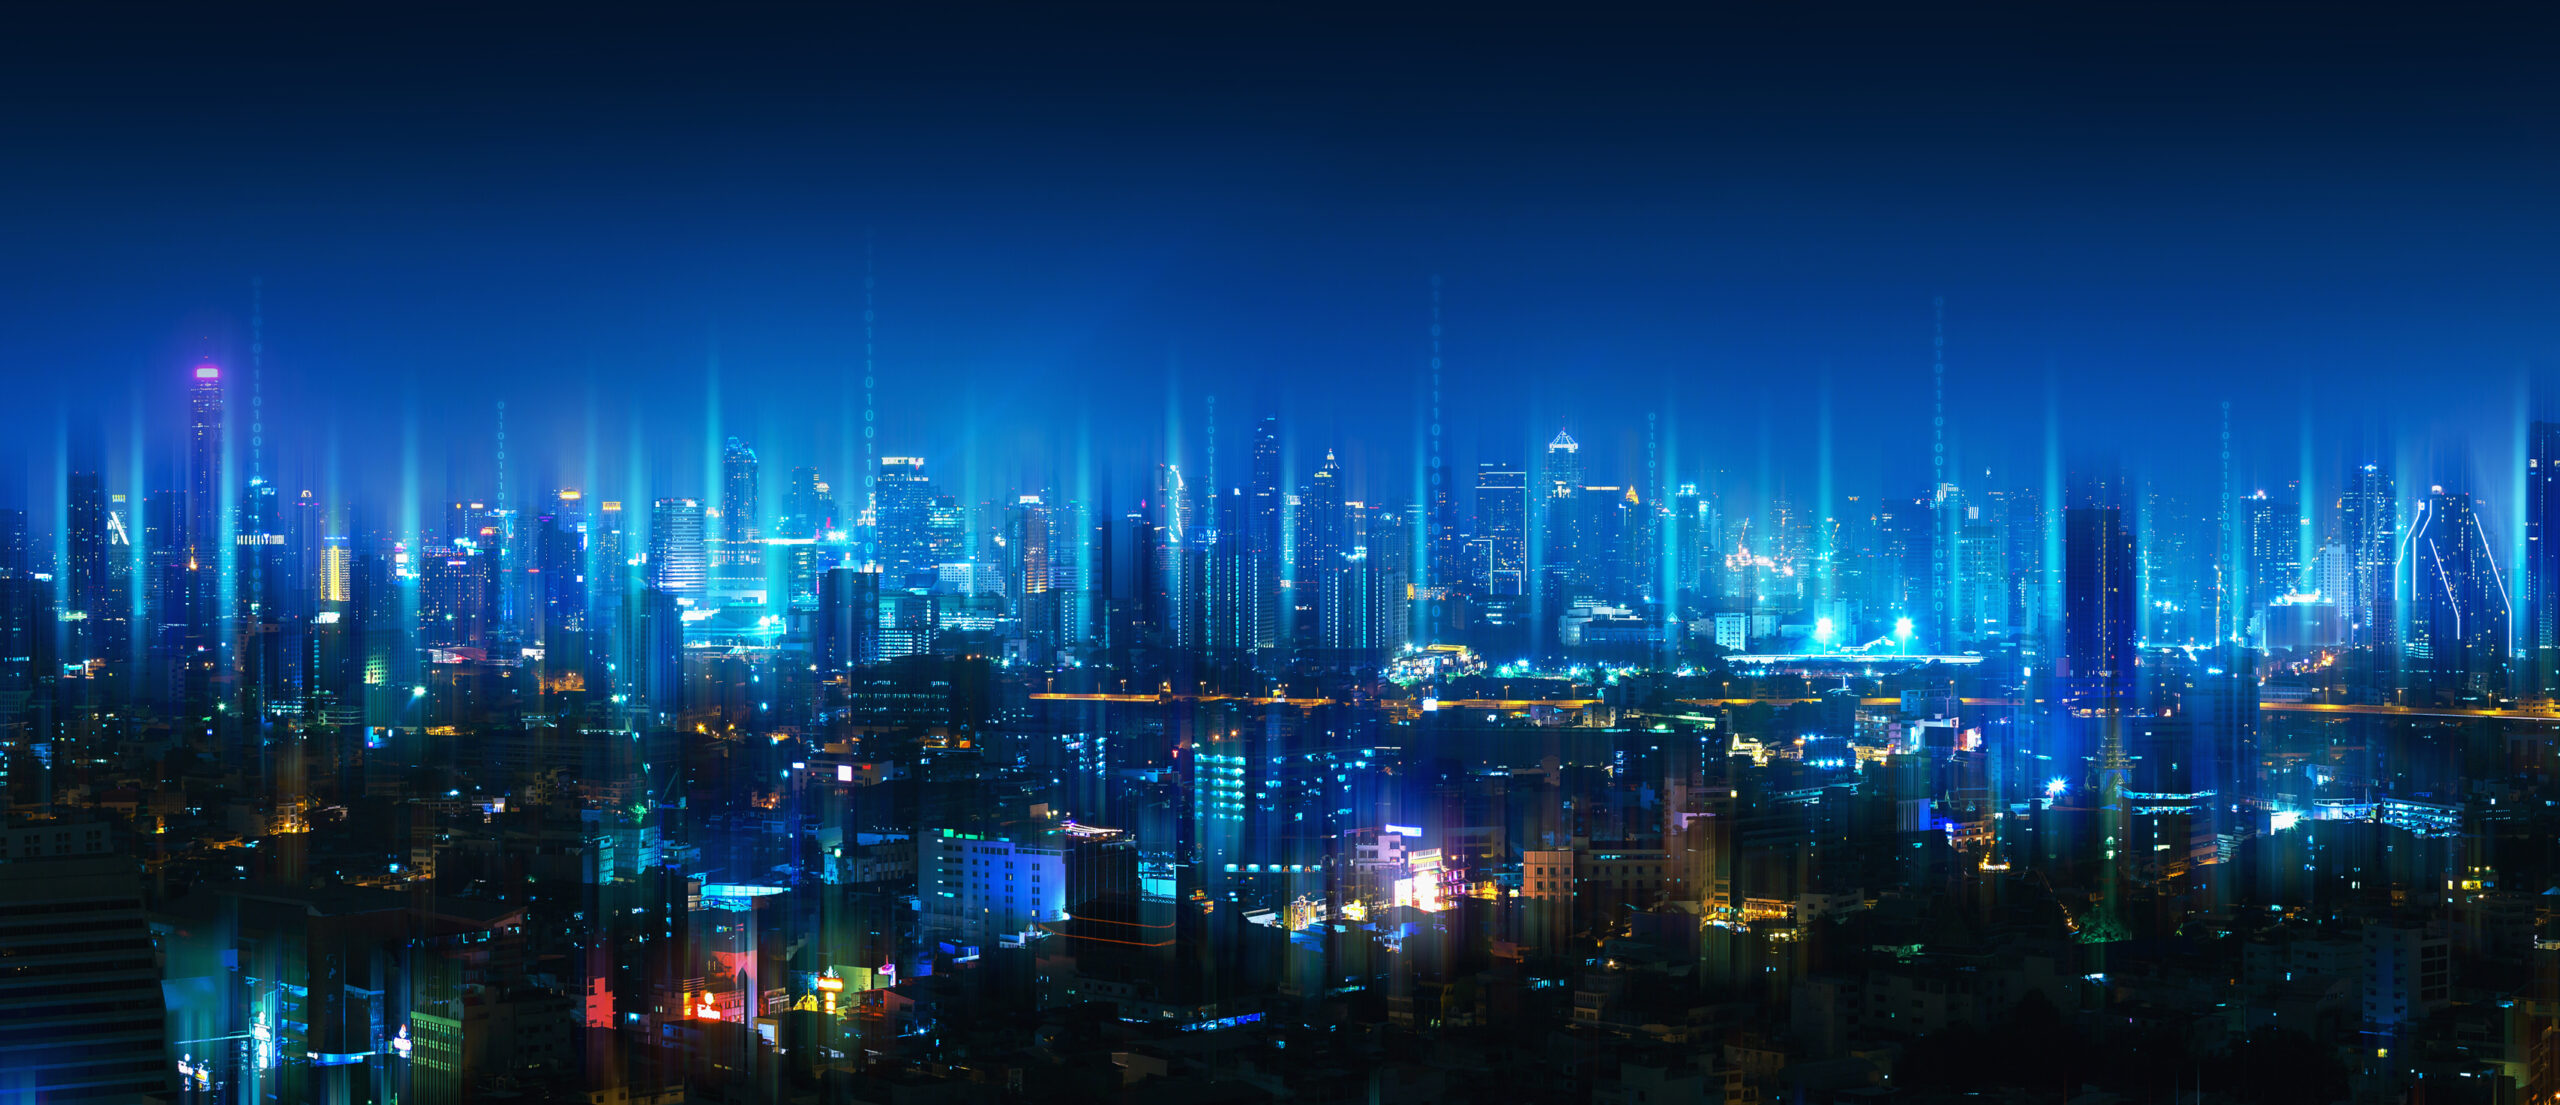 This image shows lights raising above a city to depict connectivity on a large scale.